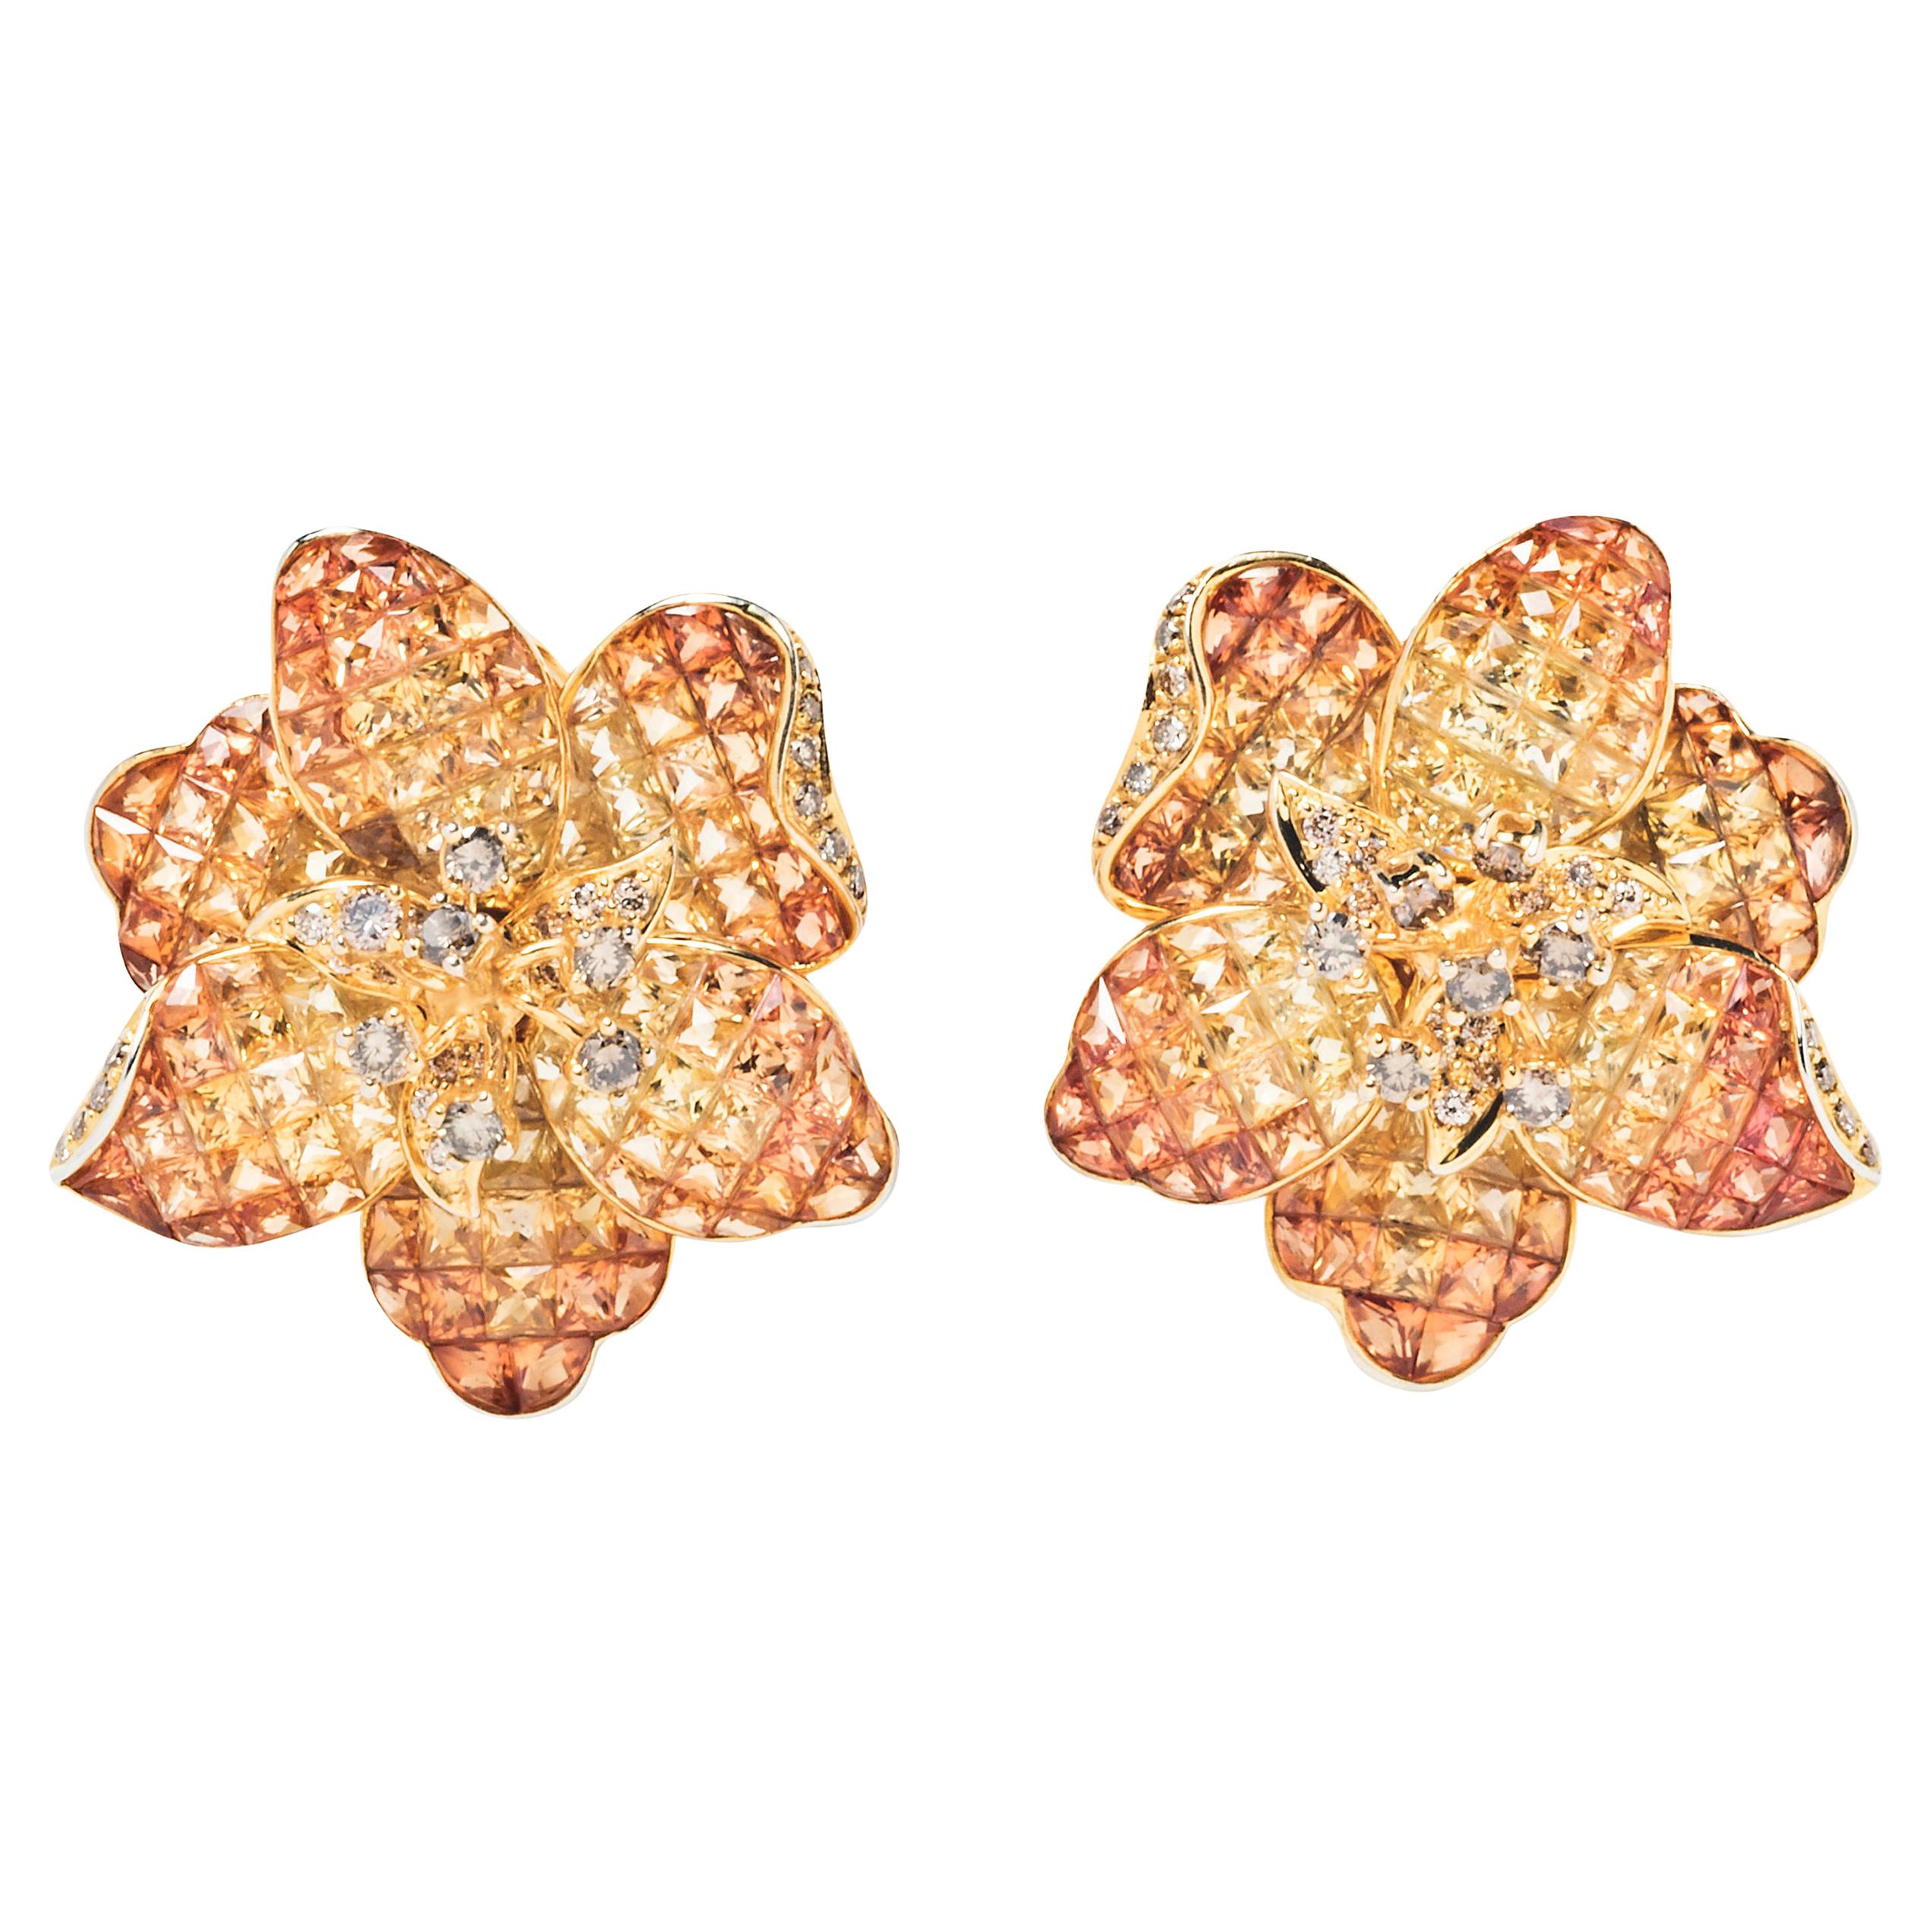 Moussaieff Yellow and Orange Sapphire Flower Ear Clips